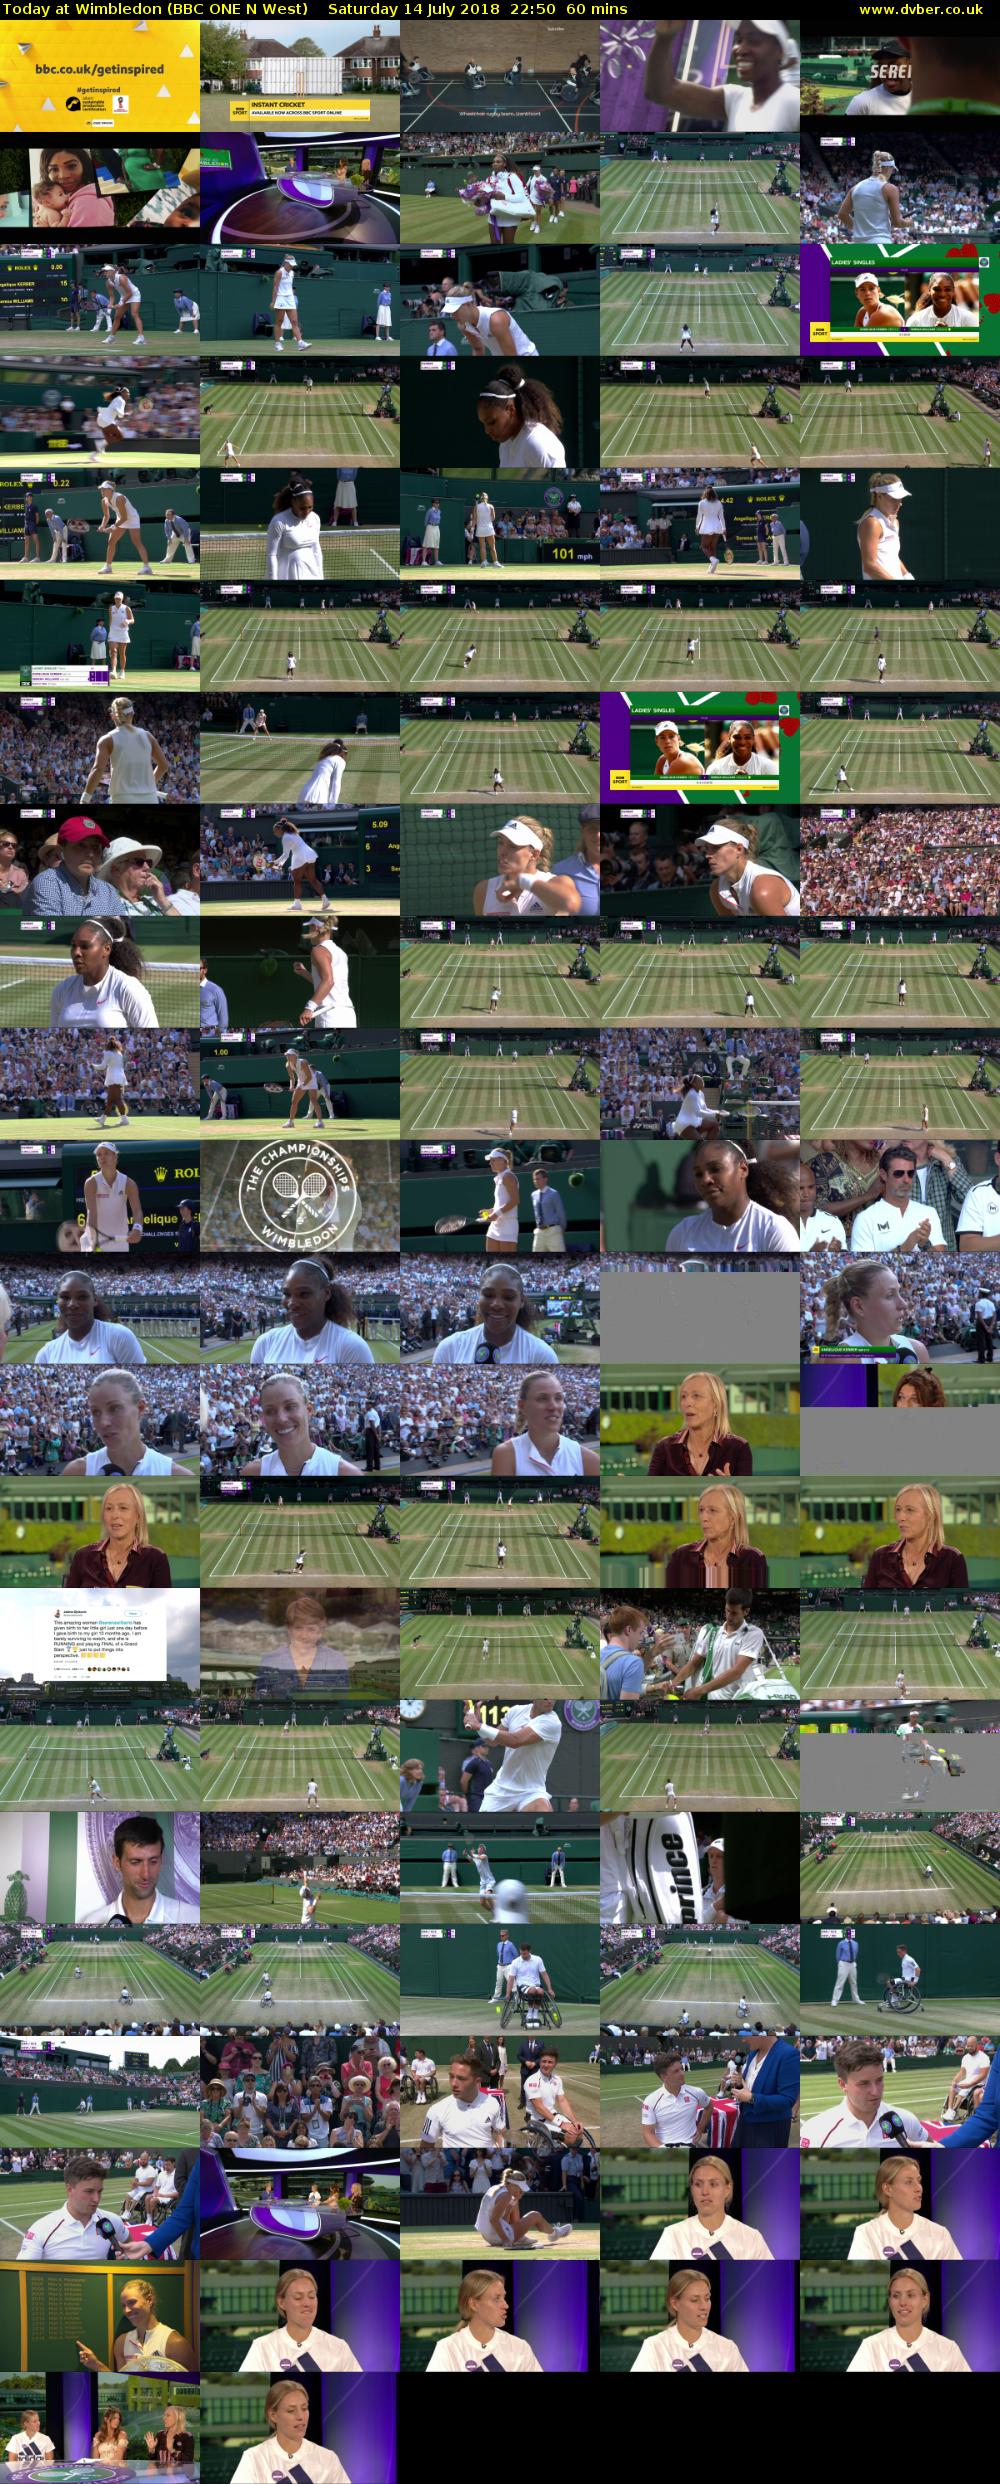 Today at Wimbledon (BBC ONE N West) Saturday 14 July 2018 22:50 - 23:50